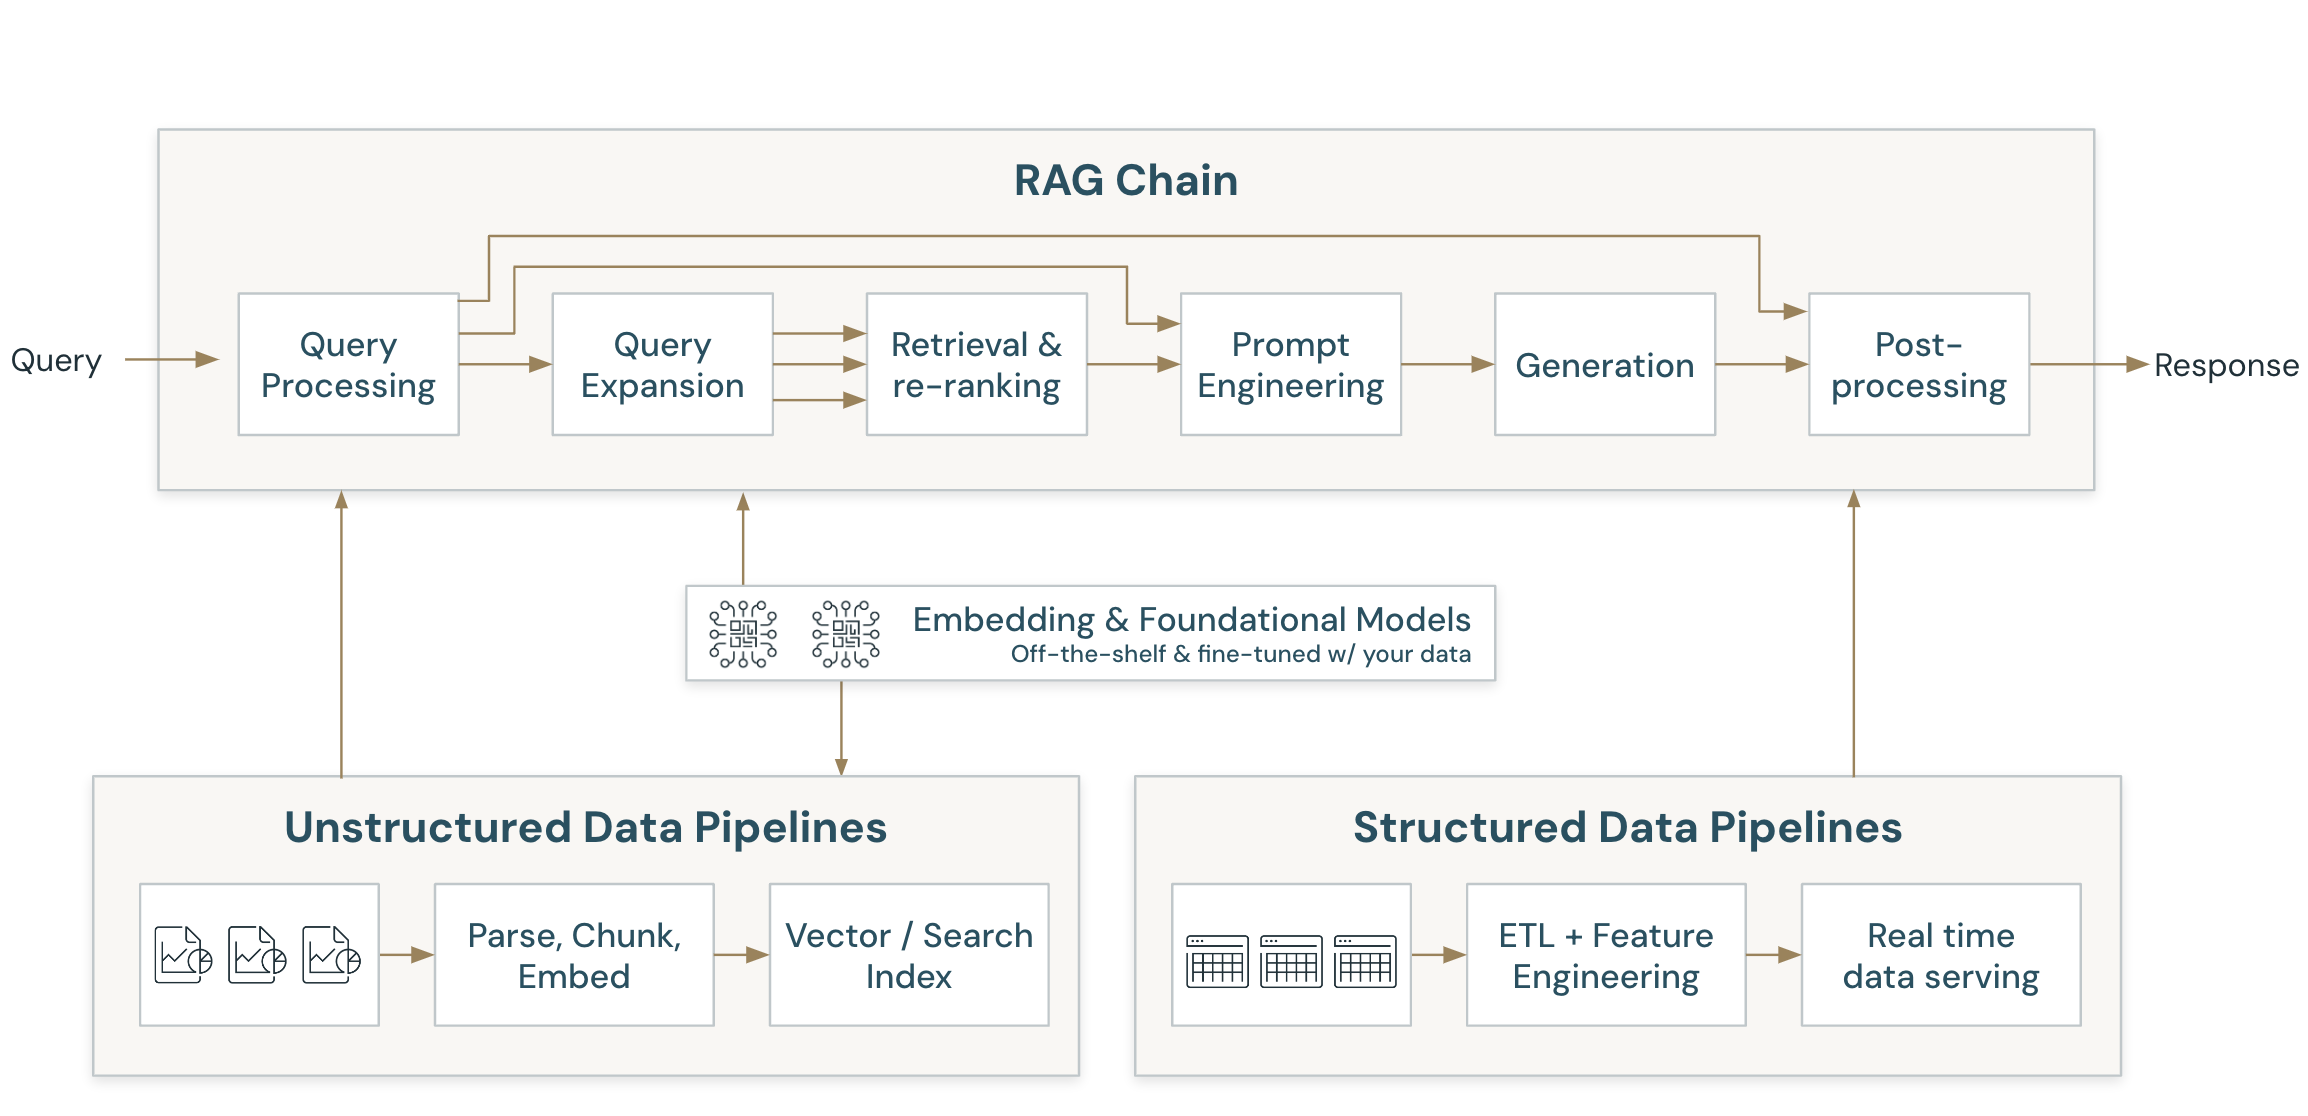 RAG application architecture for just the indexing pipeline and retrieval and generation, the RAG chain, pieces of RAG. The top section shows the RAG chain consuming the query and the subsequent steps of query processing, query expansion, retrieval and re-ranking, prompt engineering, initial response generation and post-processing, all before generating a response to the query. The bottom portion shows the RAG chain connected to separate data pipelines for 1. unstructured data, which includes data parsing, chunking and embedding and storing that data in a vector search database or index. Unstructured data pipelines require interaction with embedding and foundational models to feed into the RAG chain and 2. structured data pipelines, which includes consuming already embedded data chunks and performing ETL tasks and feature engineering before serving this data to the RAG chain